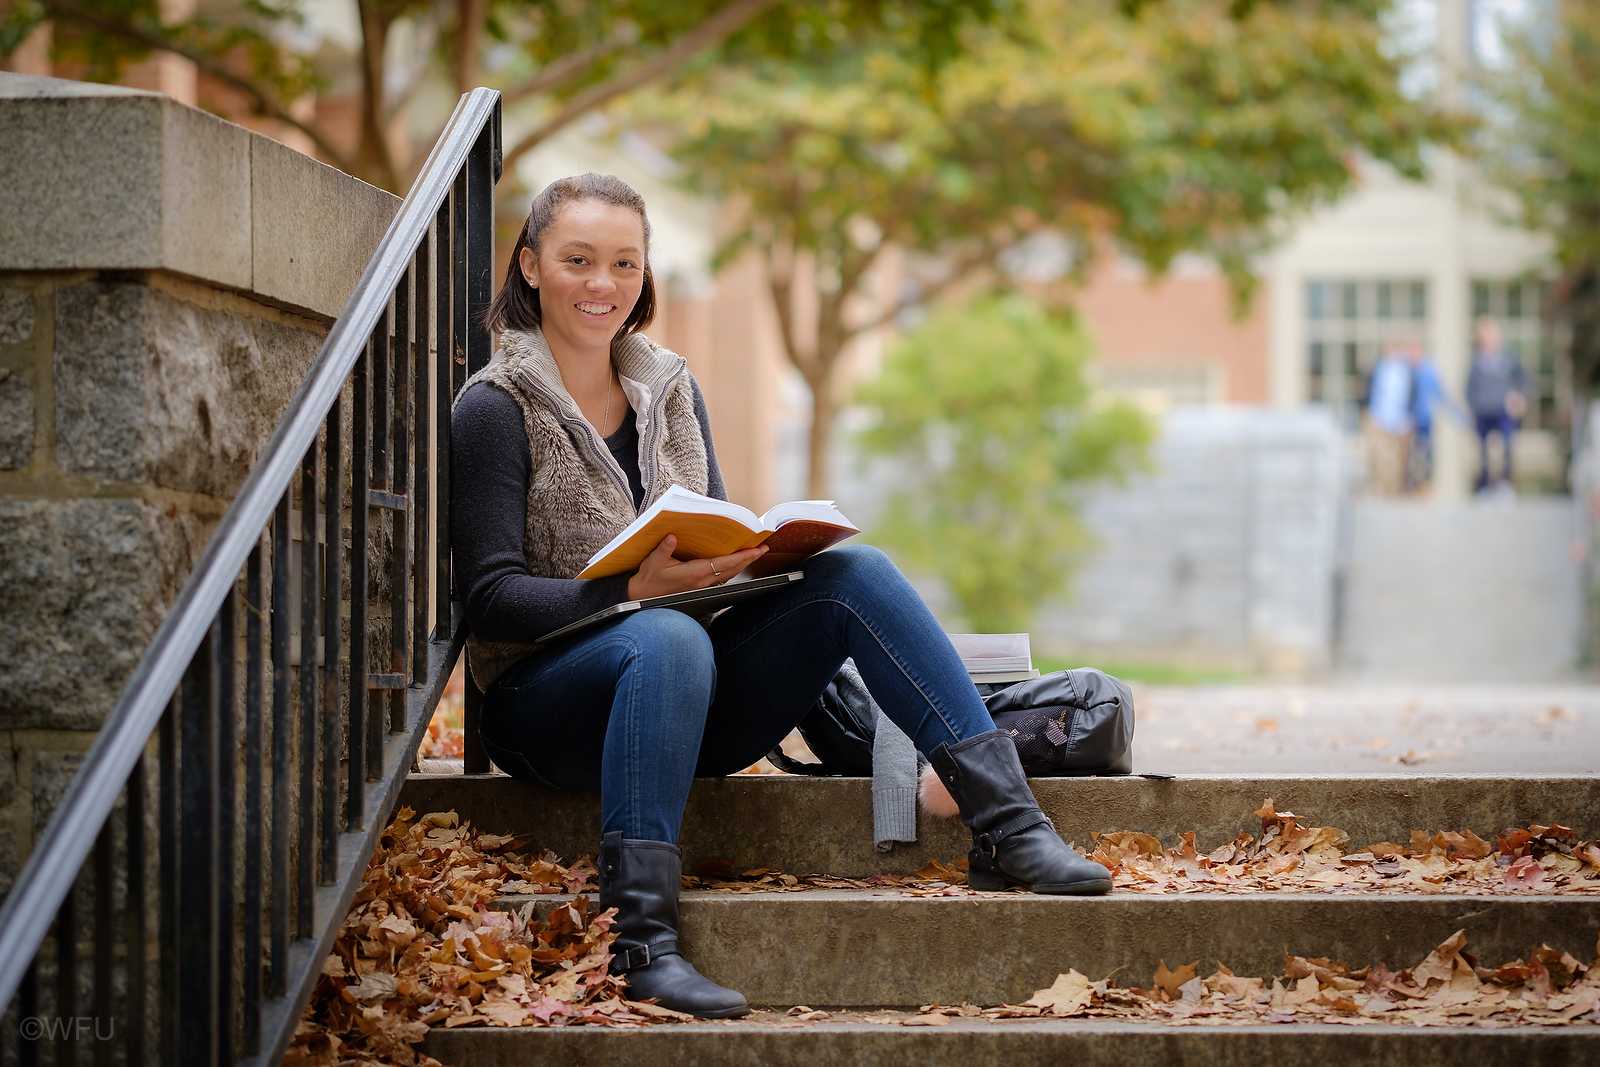 Wake Forest junior Asia Parker studies outdoors on campus on Monday, November 14, 2016.